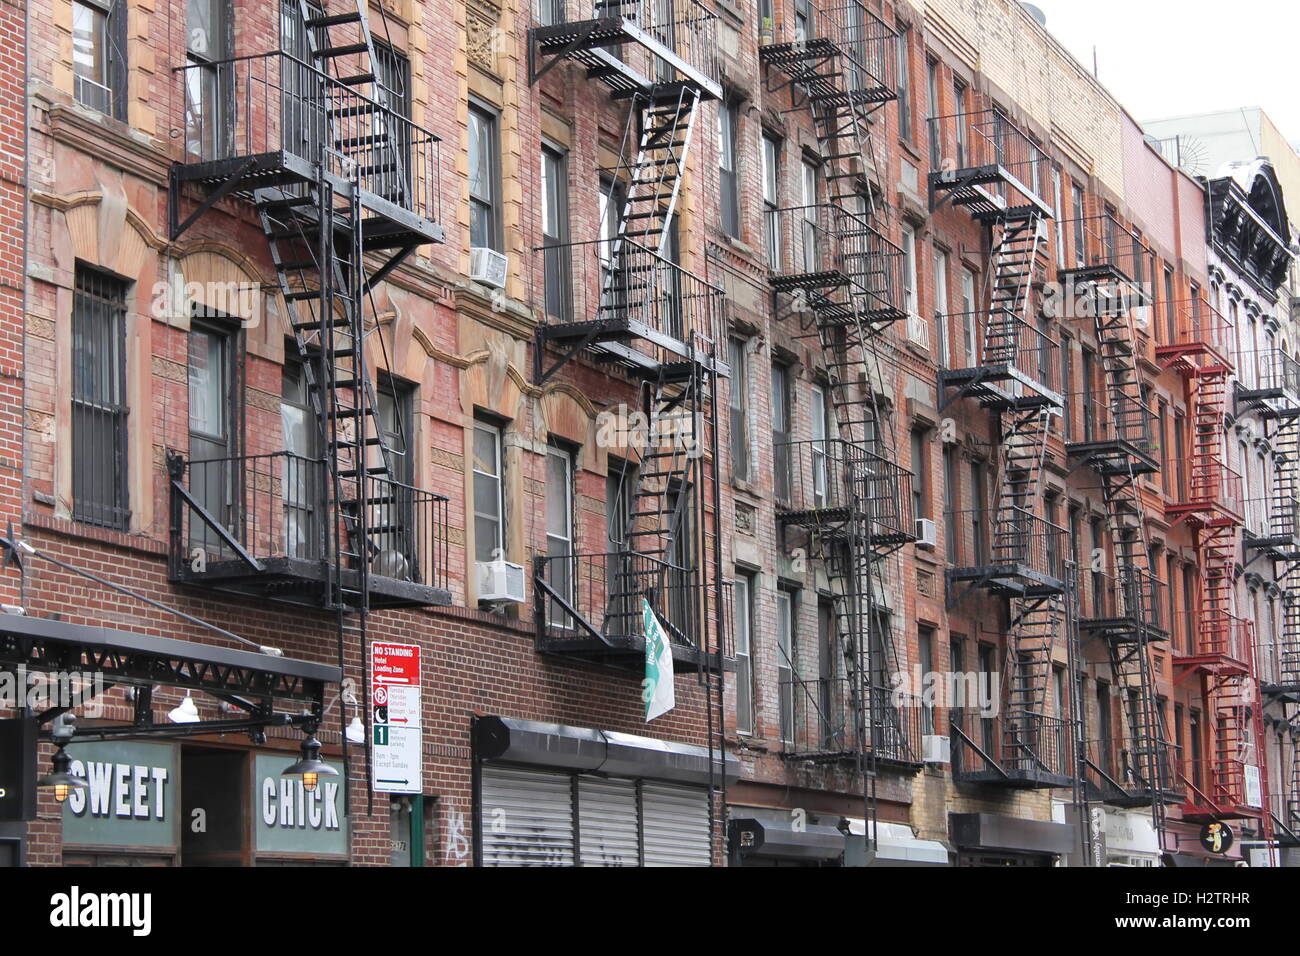 Old red brick apartment buildings in New York City Stock Photo - Alamy